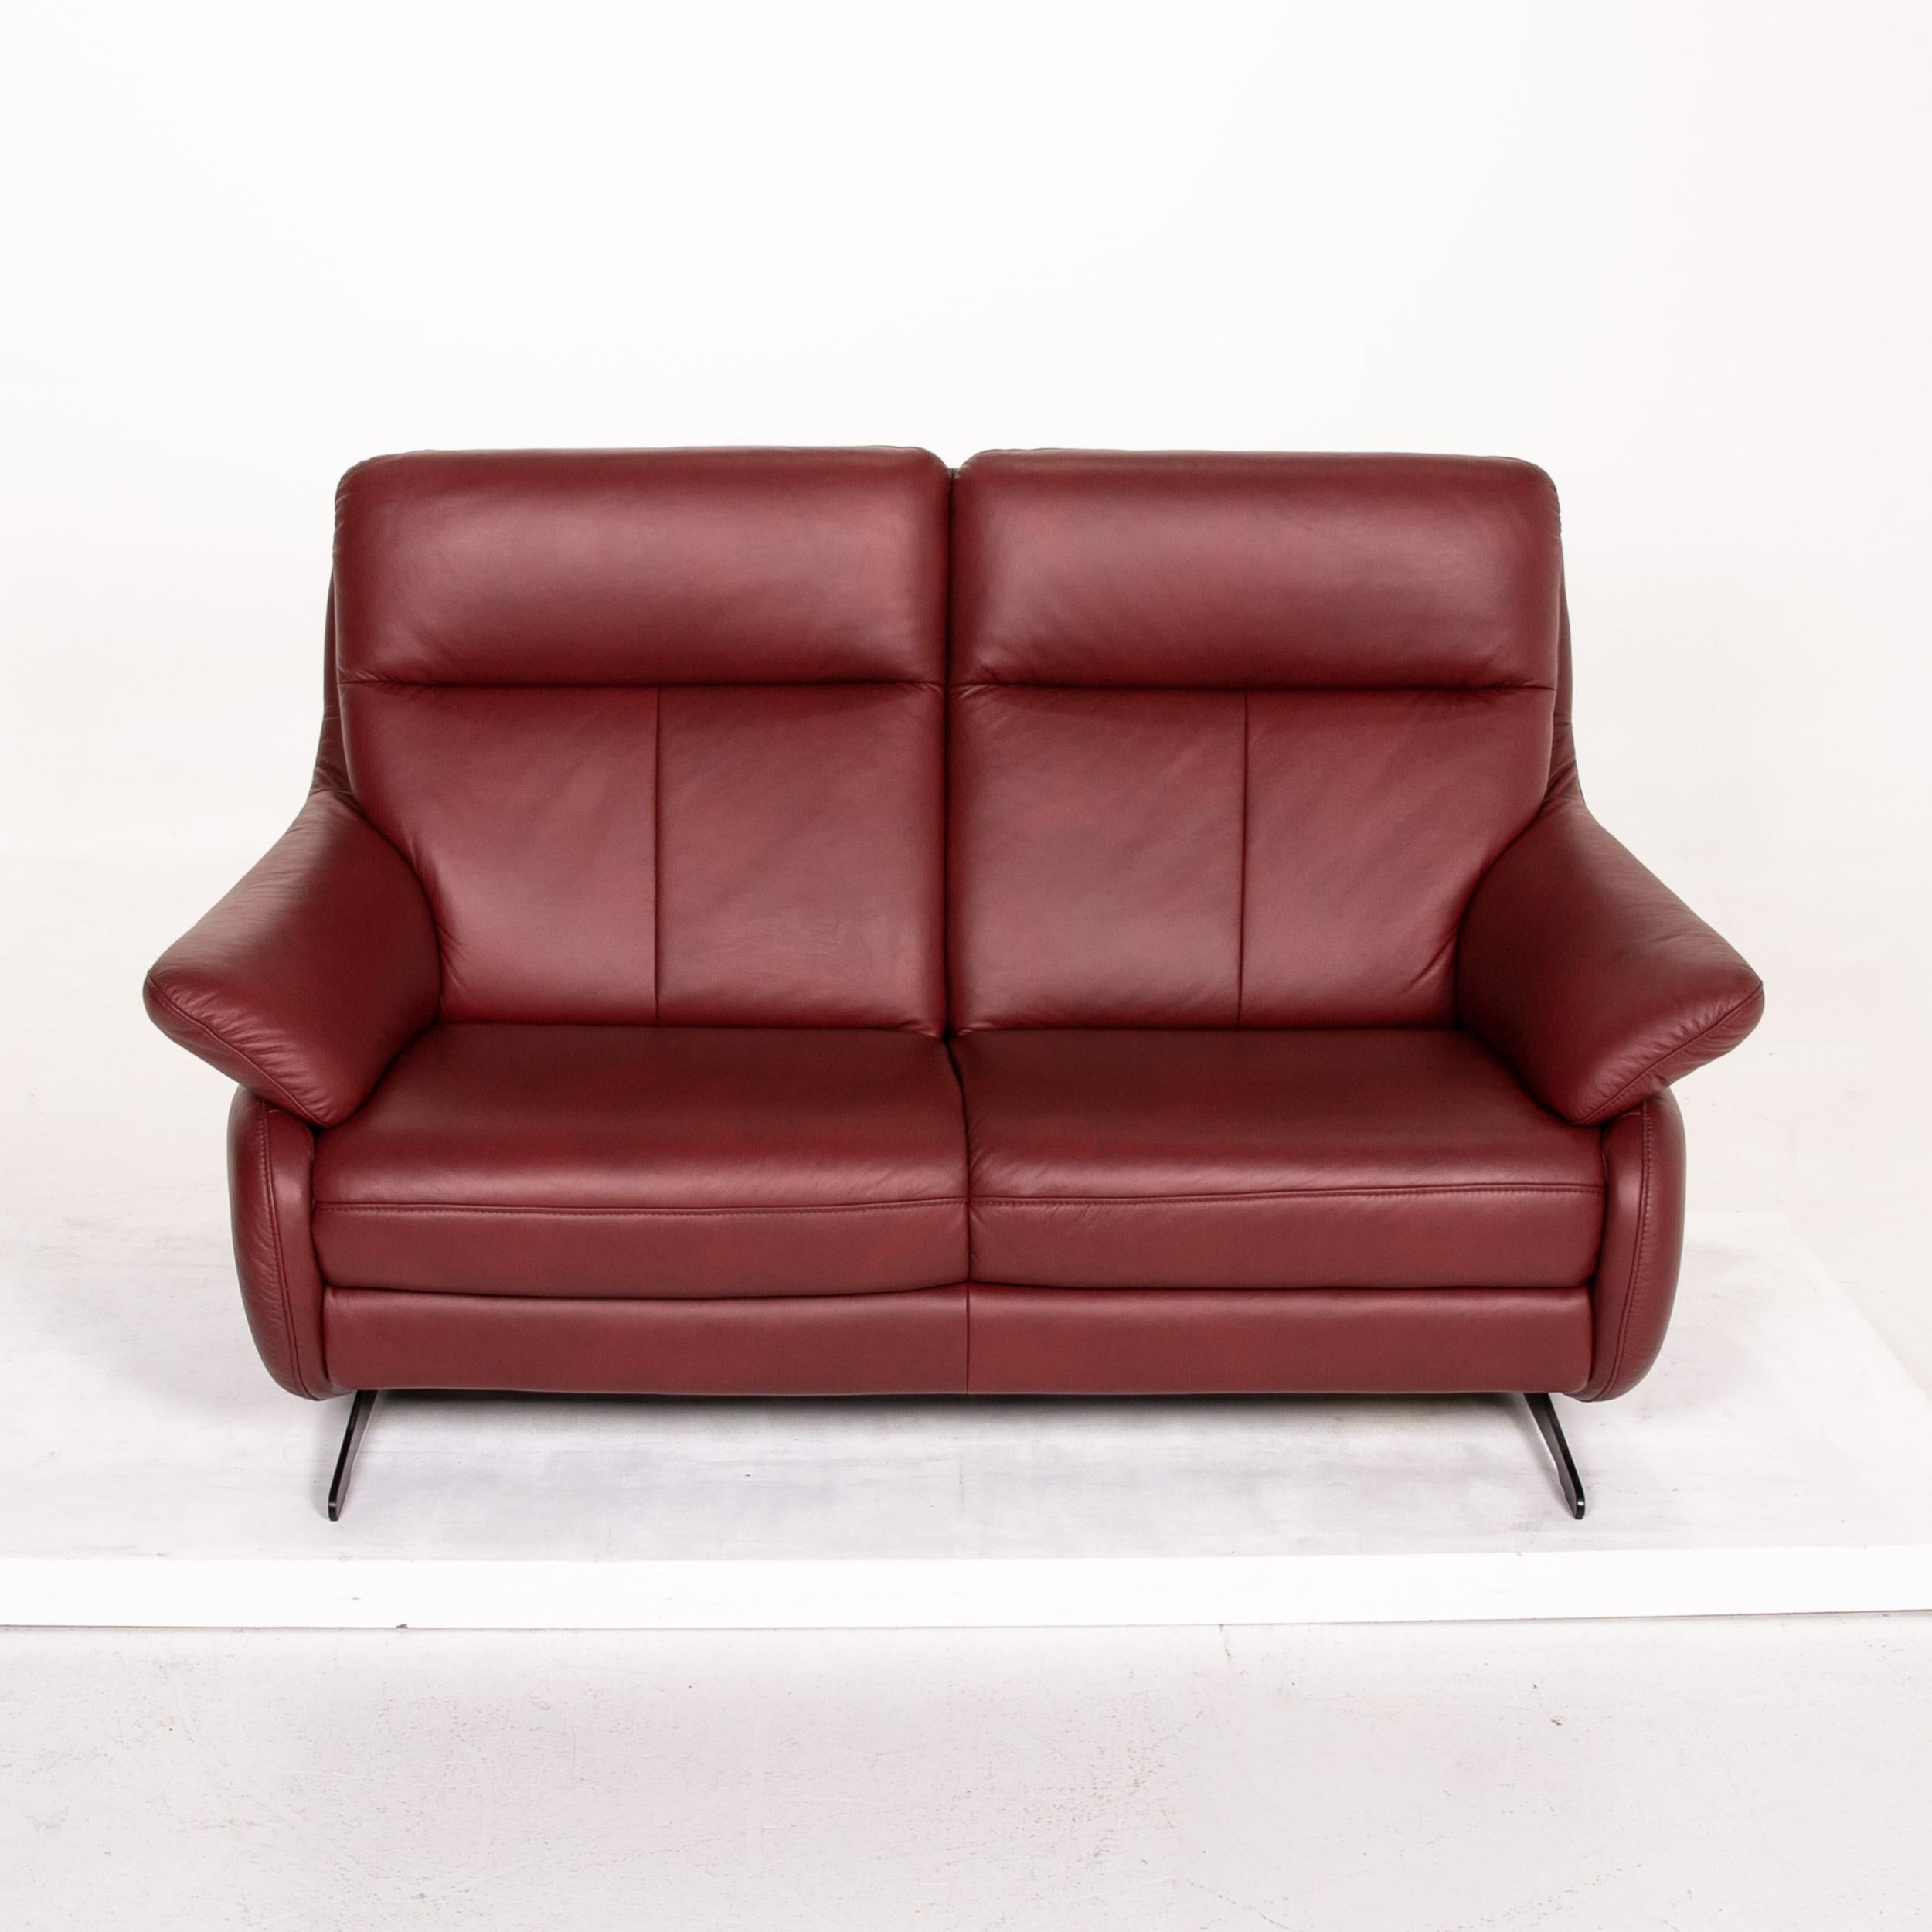 Polish Himolla Leather Sofa Red Dark Red Two-Seat Couch For Sale